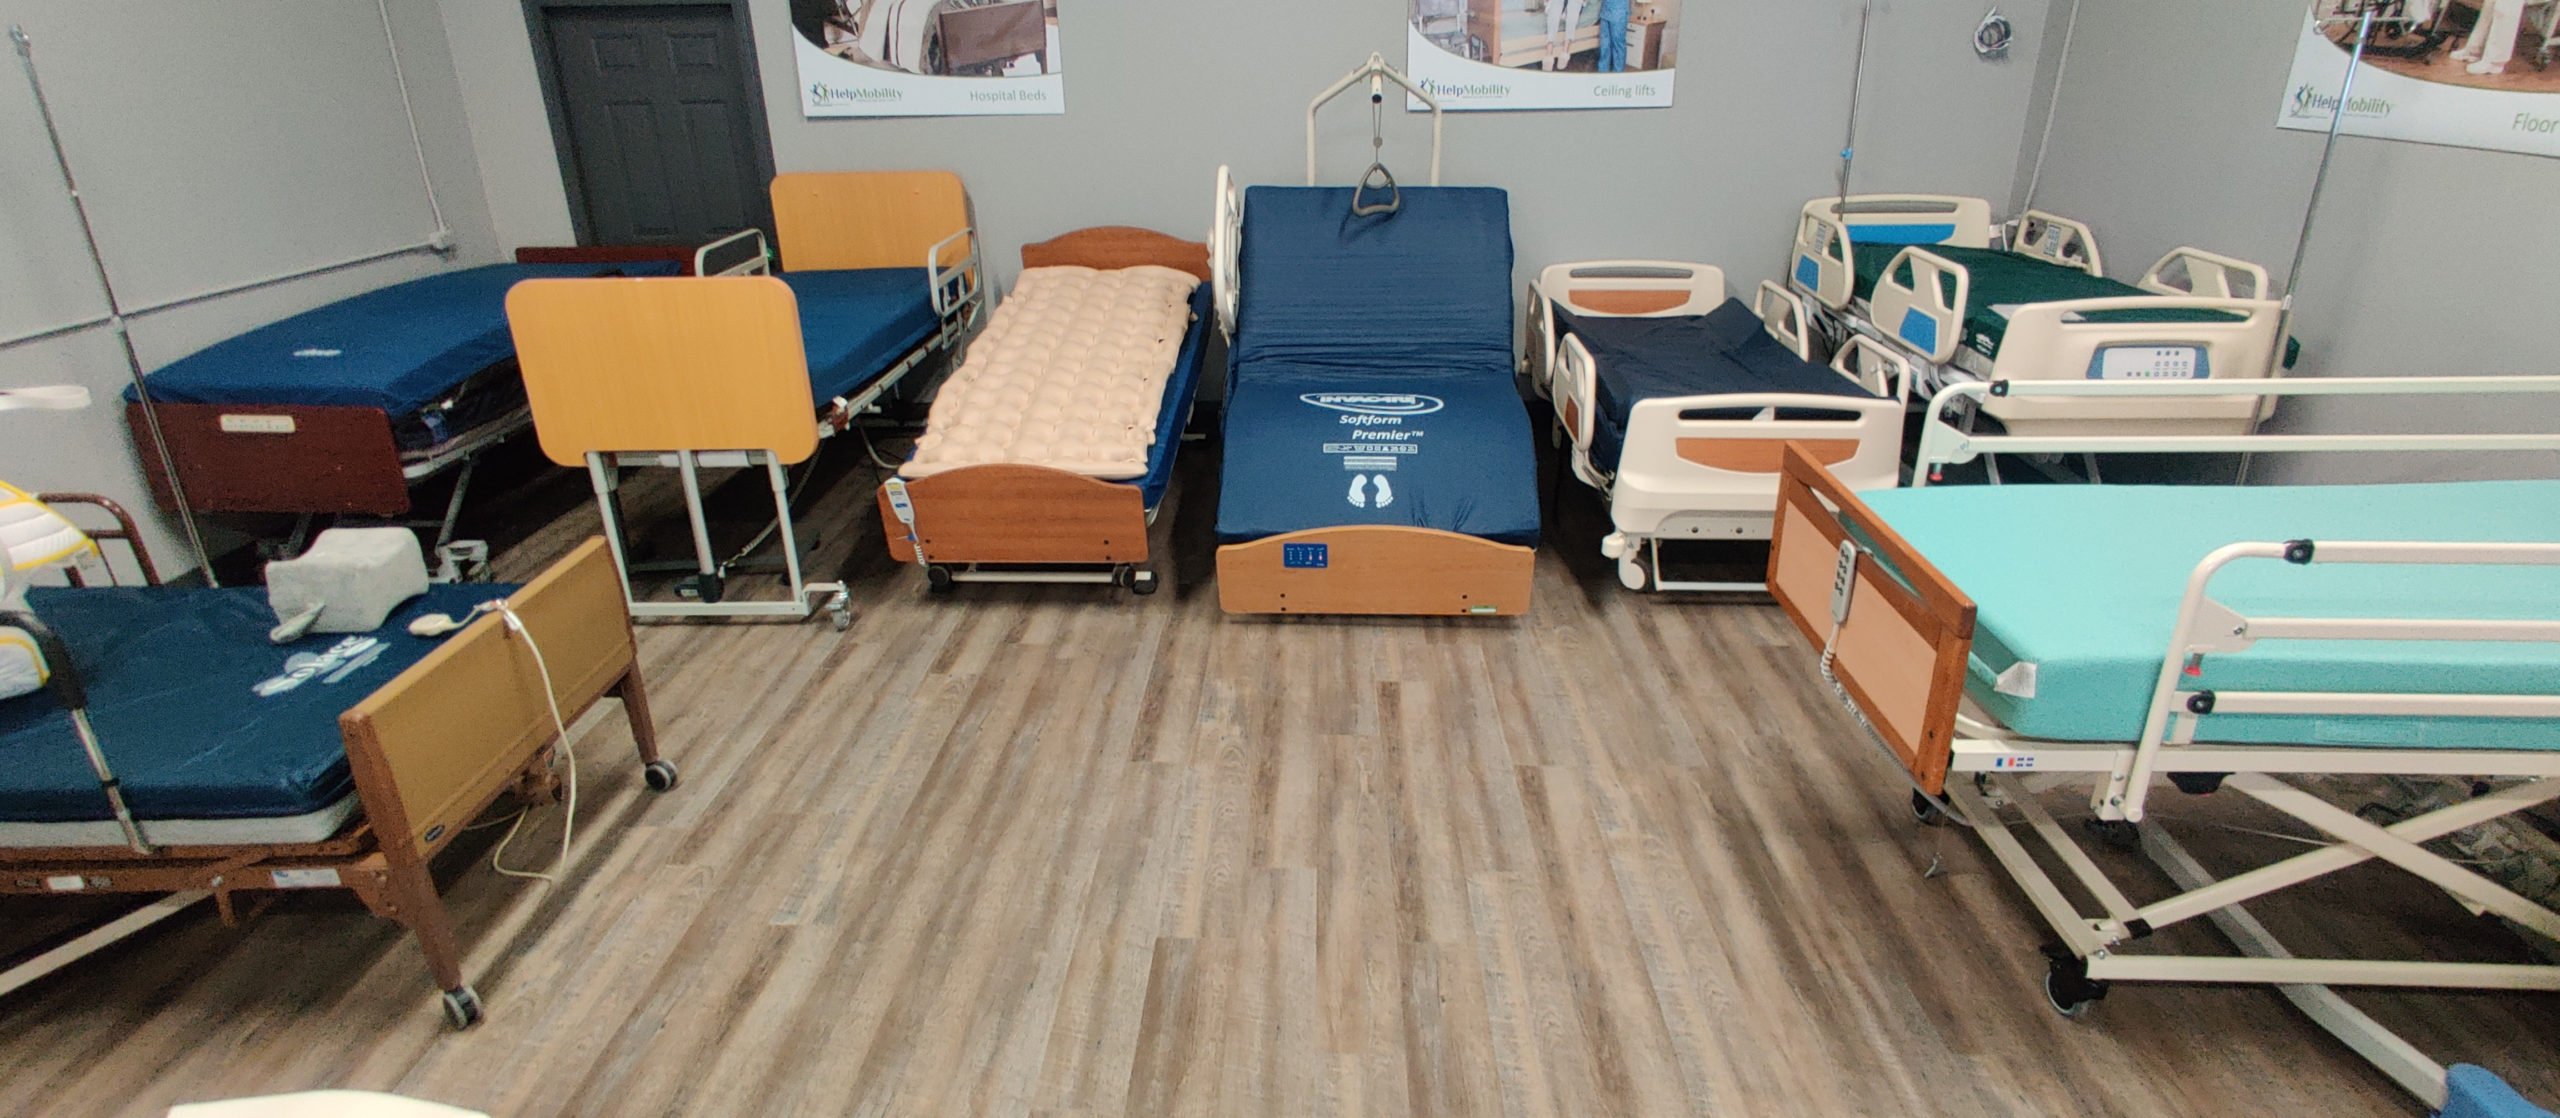 Brandnew hospital bed free delivery and installation - Home - Facebook